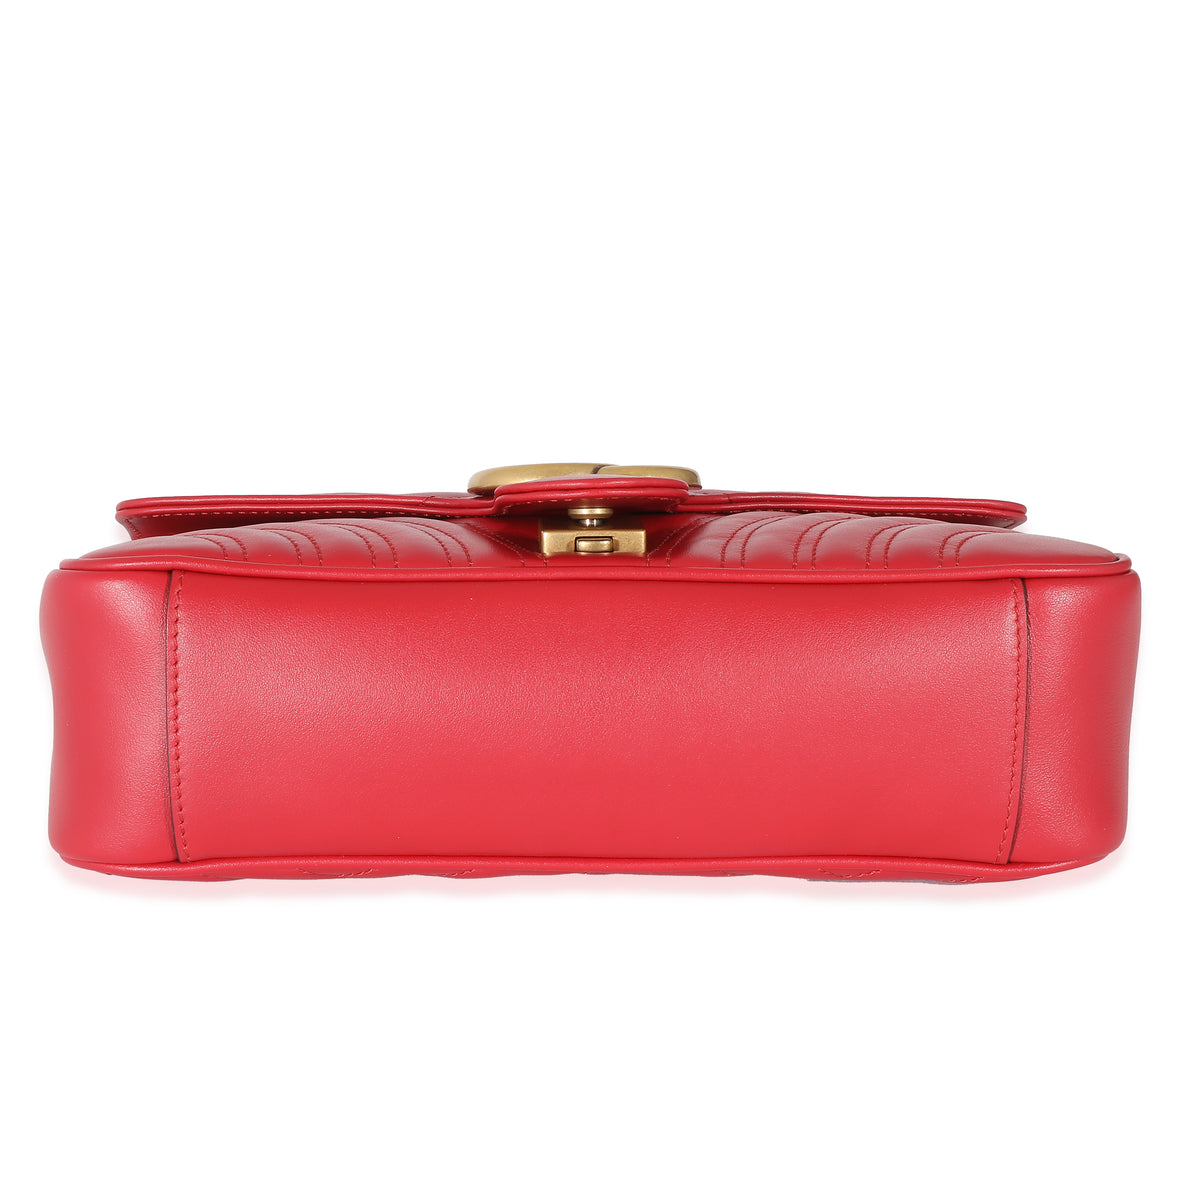 Gucci Red Matelasse Small Marmont Shoulder Bag